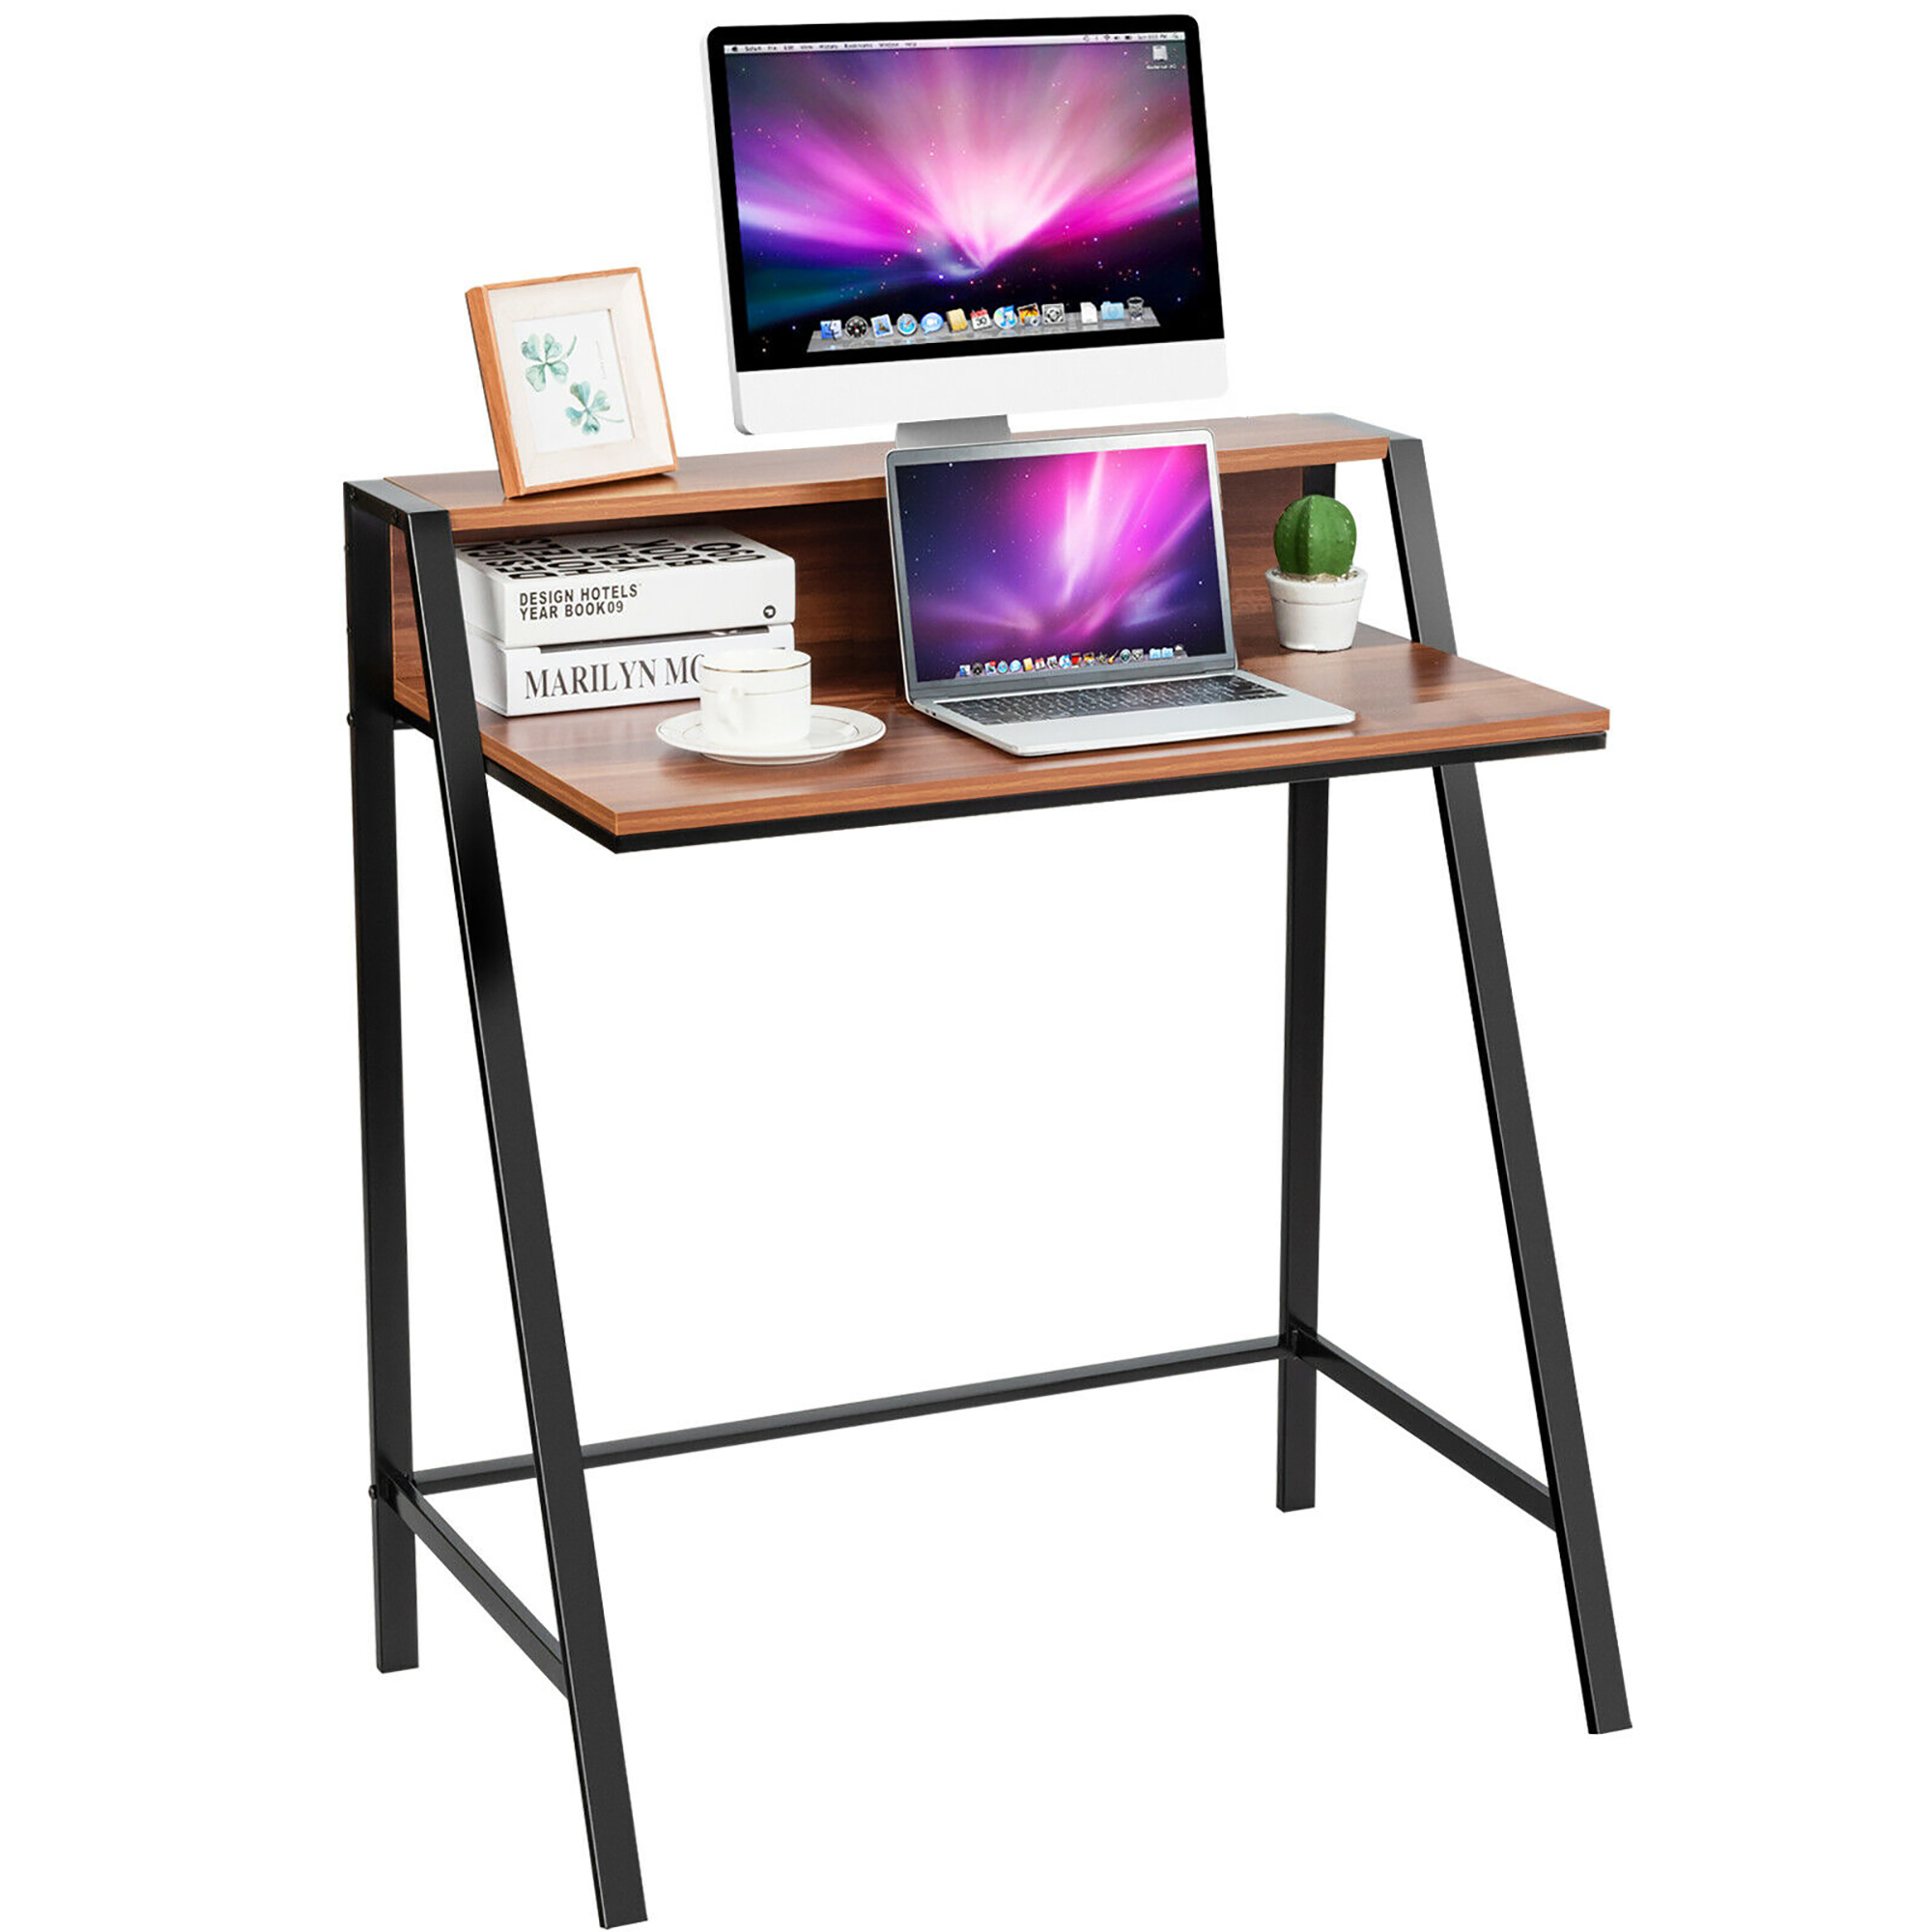 Costway 2 Tier Computer Desk PC Laptop Table Study Writing Home Office Workstation - image 1 of 10